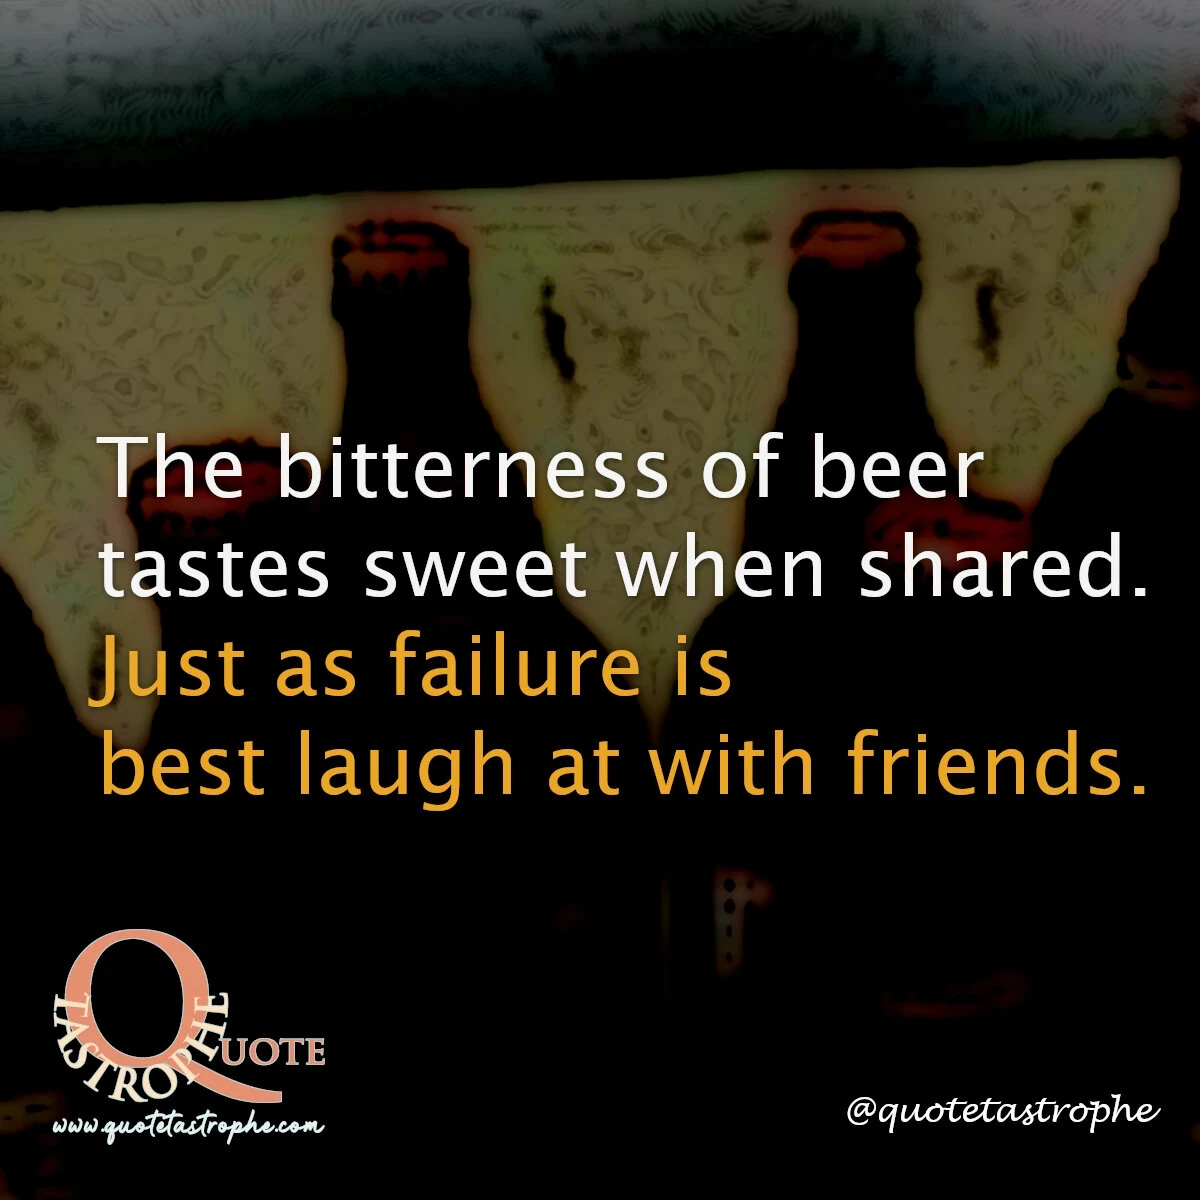 The Bitterness of Beer Tastes Sweet When Shared